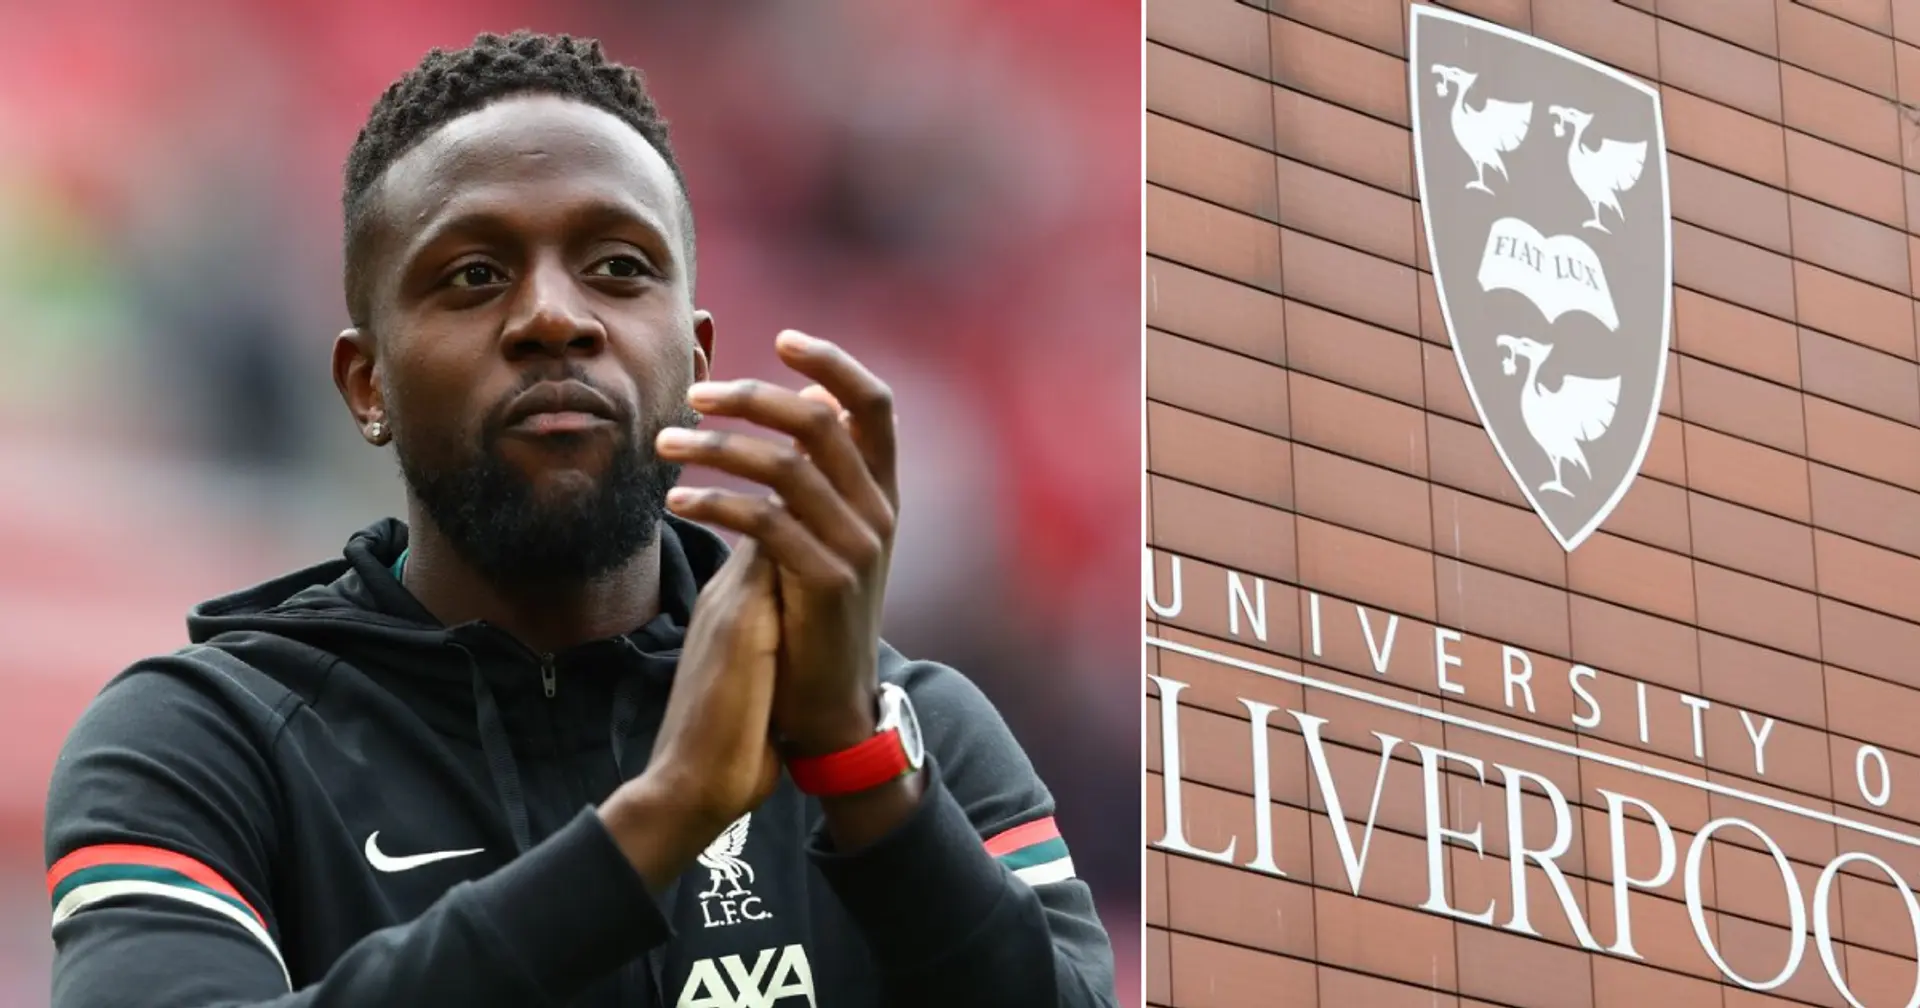 Divock Origi agrees to keep his University of Liverpool scholarship going even after Anfield exit